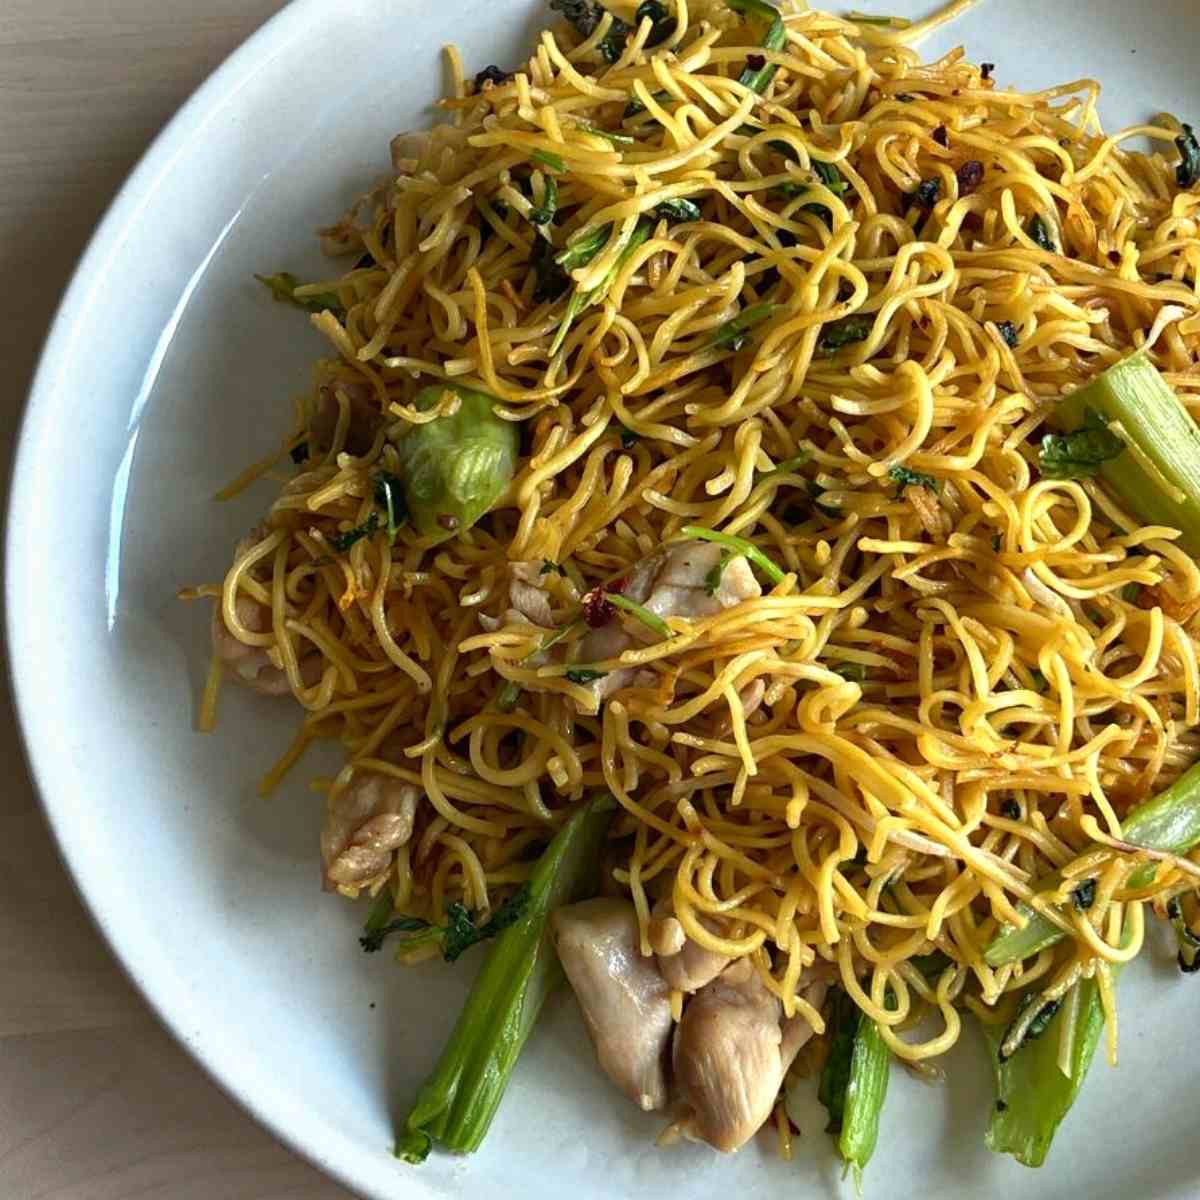 Stir fry egg noodles with chicken